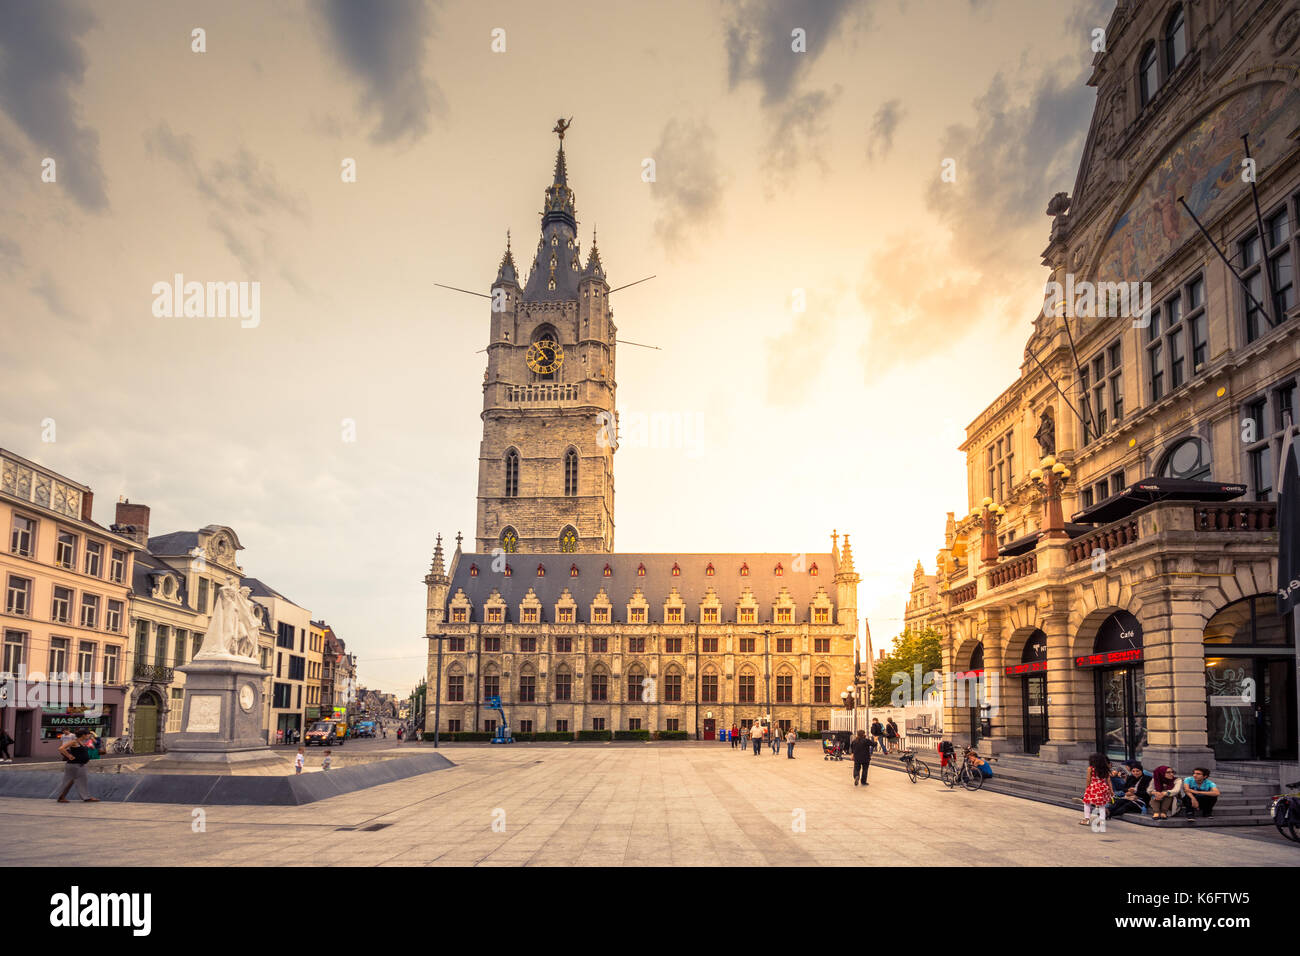 Ghent's old city center scenic place - Ghent, Belgium Stock Photo